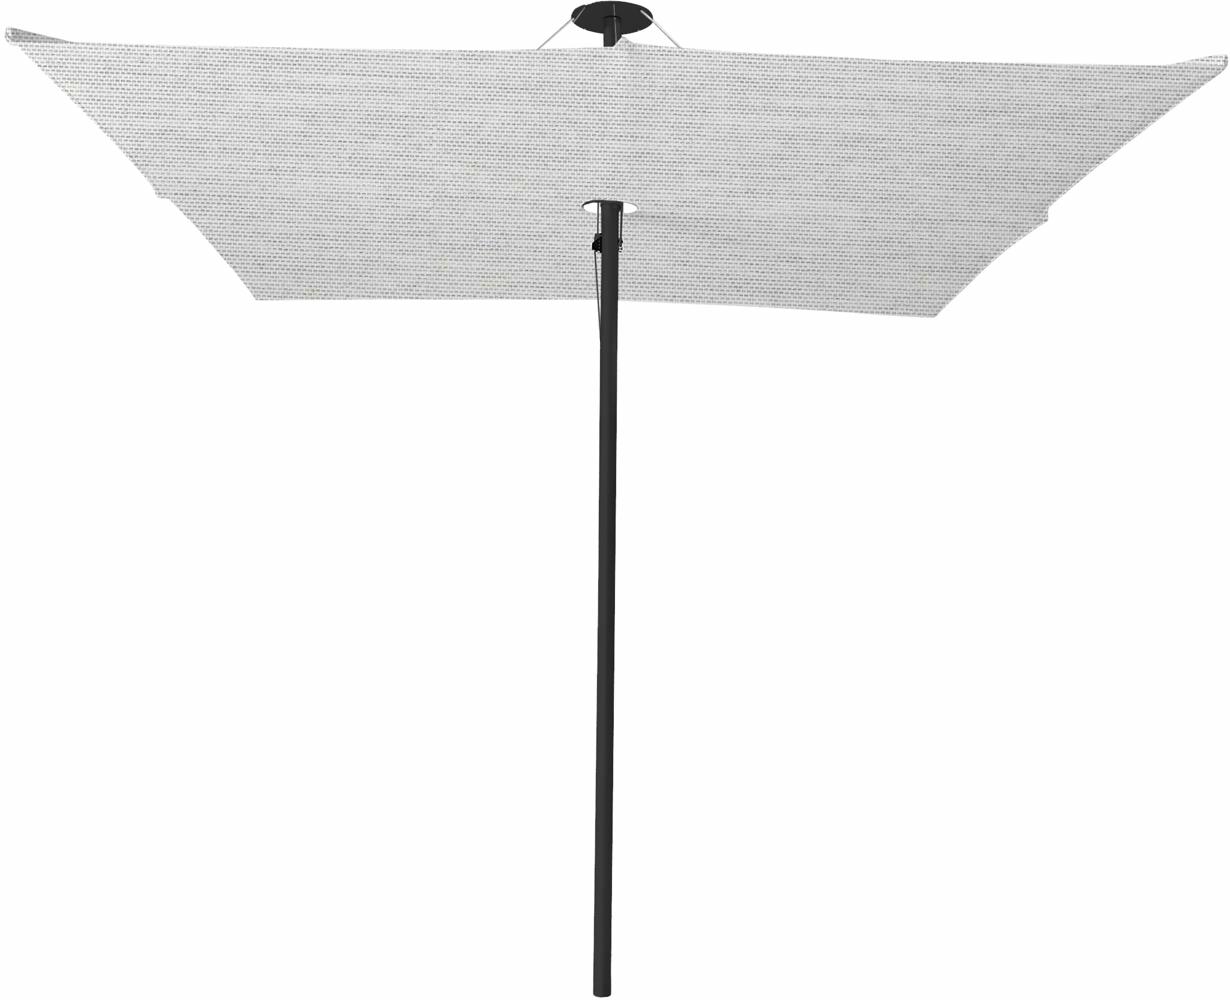 Infina center post umbrella, 3 m square, with frame in Dusk and Solidum Marble canopy. 